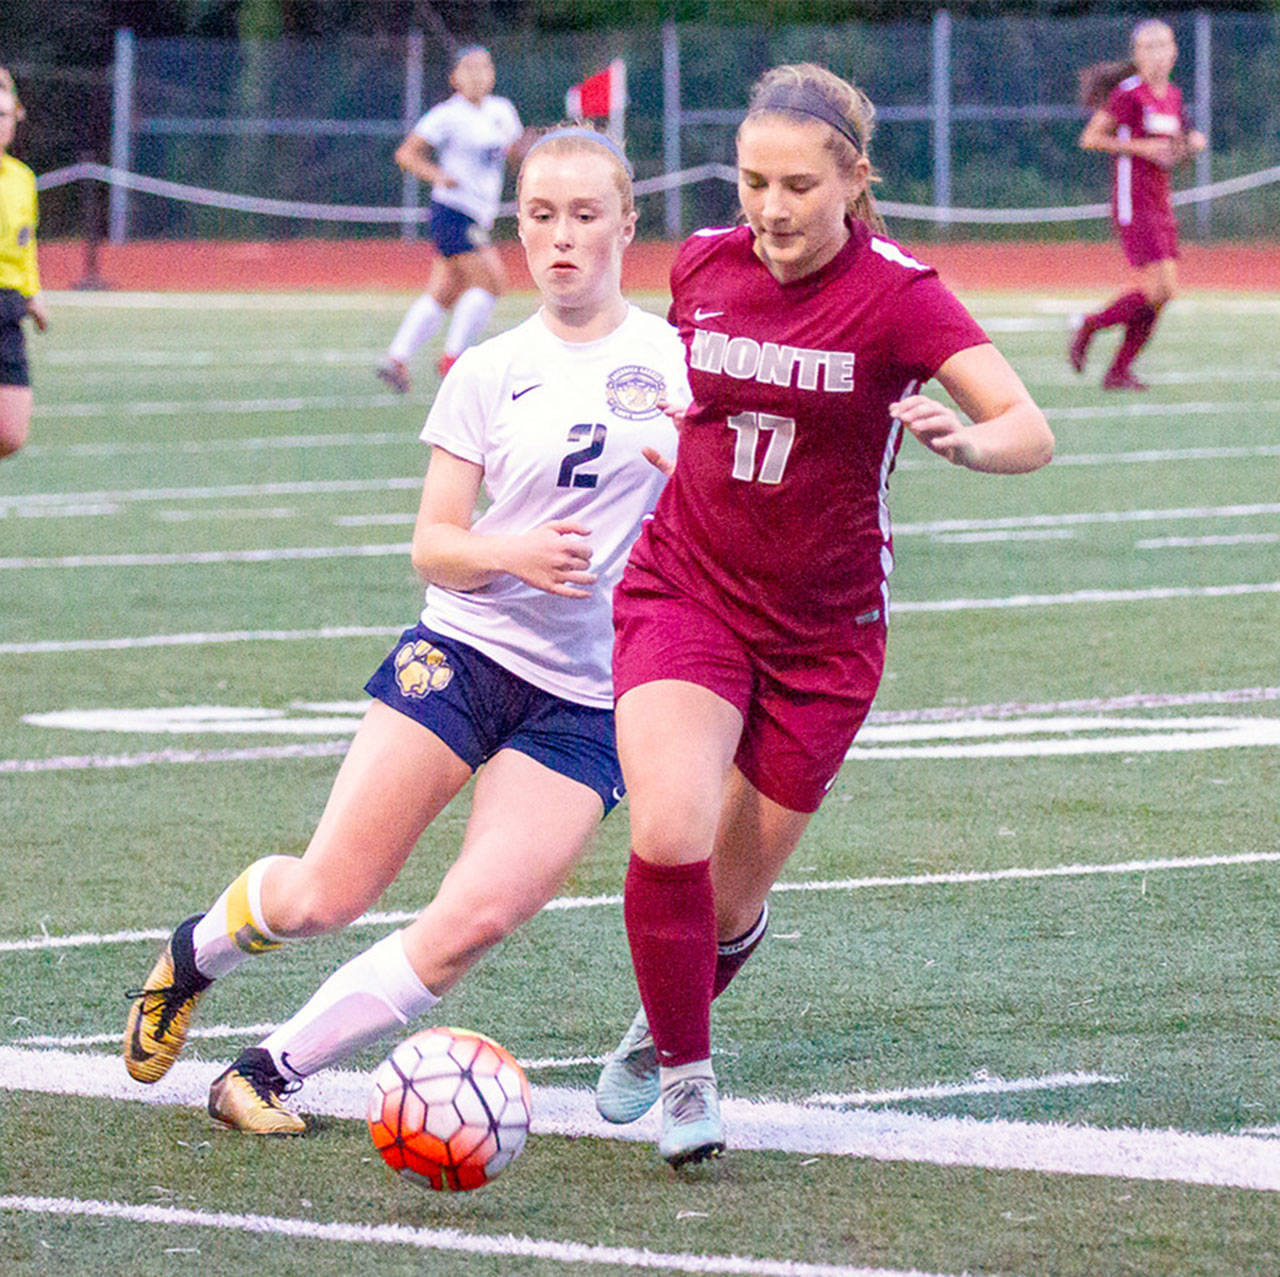 Photo by Shawn Donnelly                                Montesano’s Katie Granstrom (17), seen here against Aberdeen on Sept. 6, 2018, was named to the 1A All-State First Team as a defender.